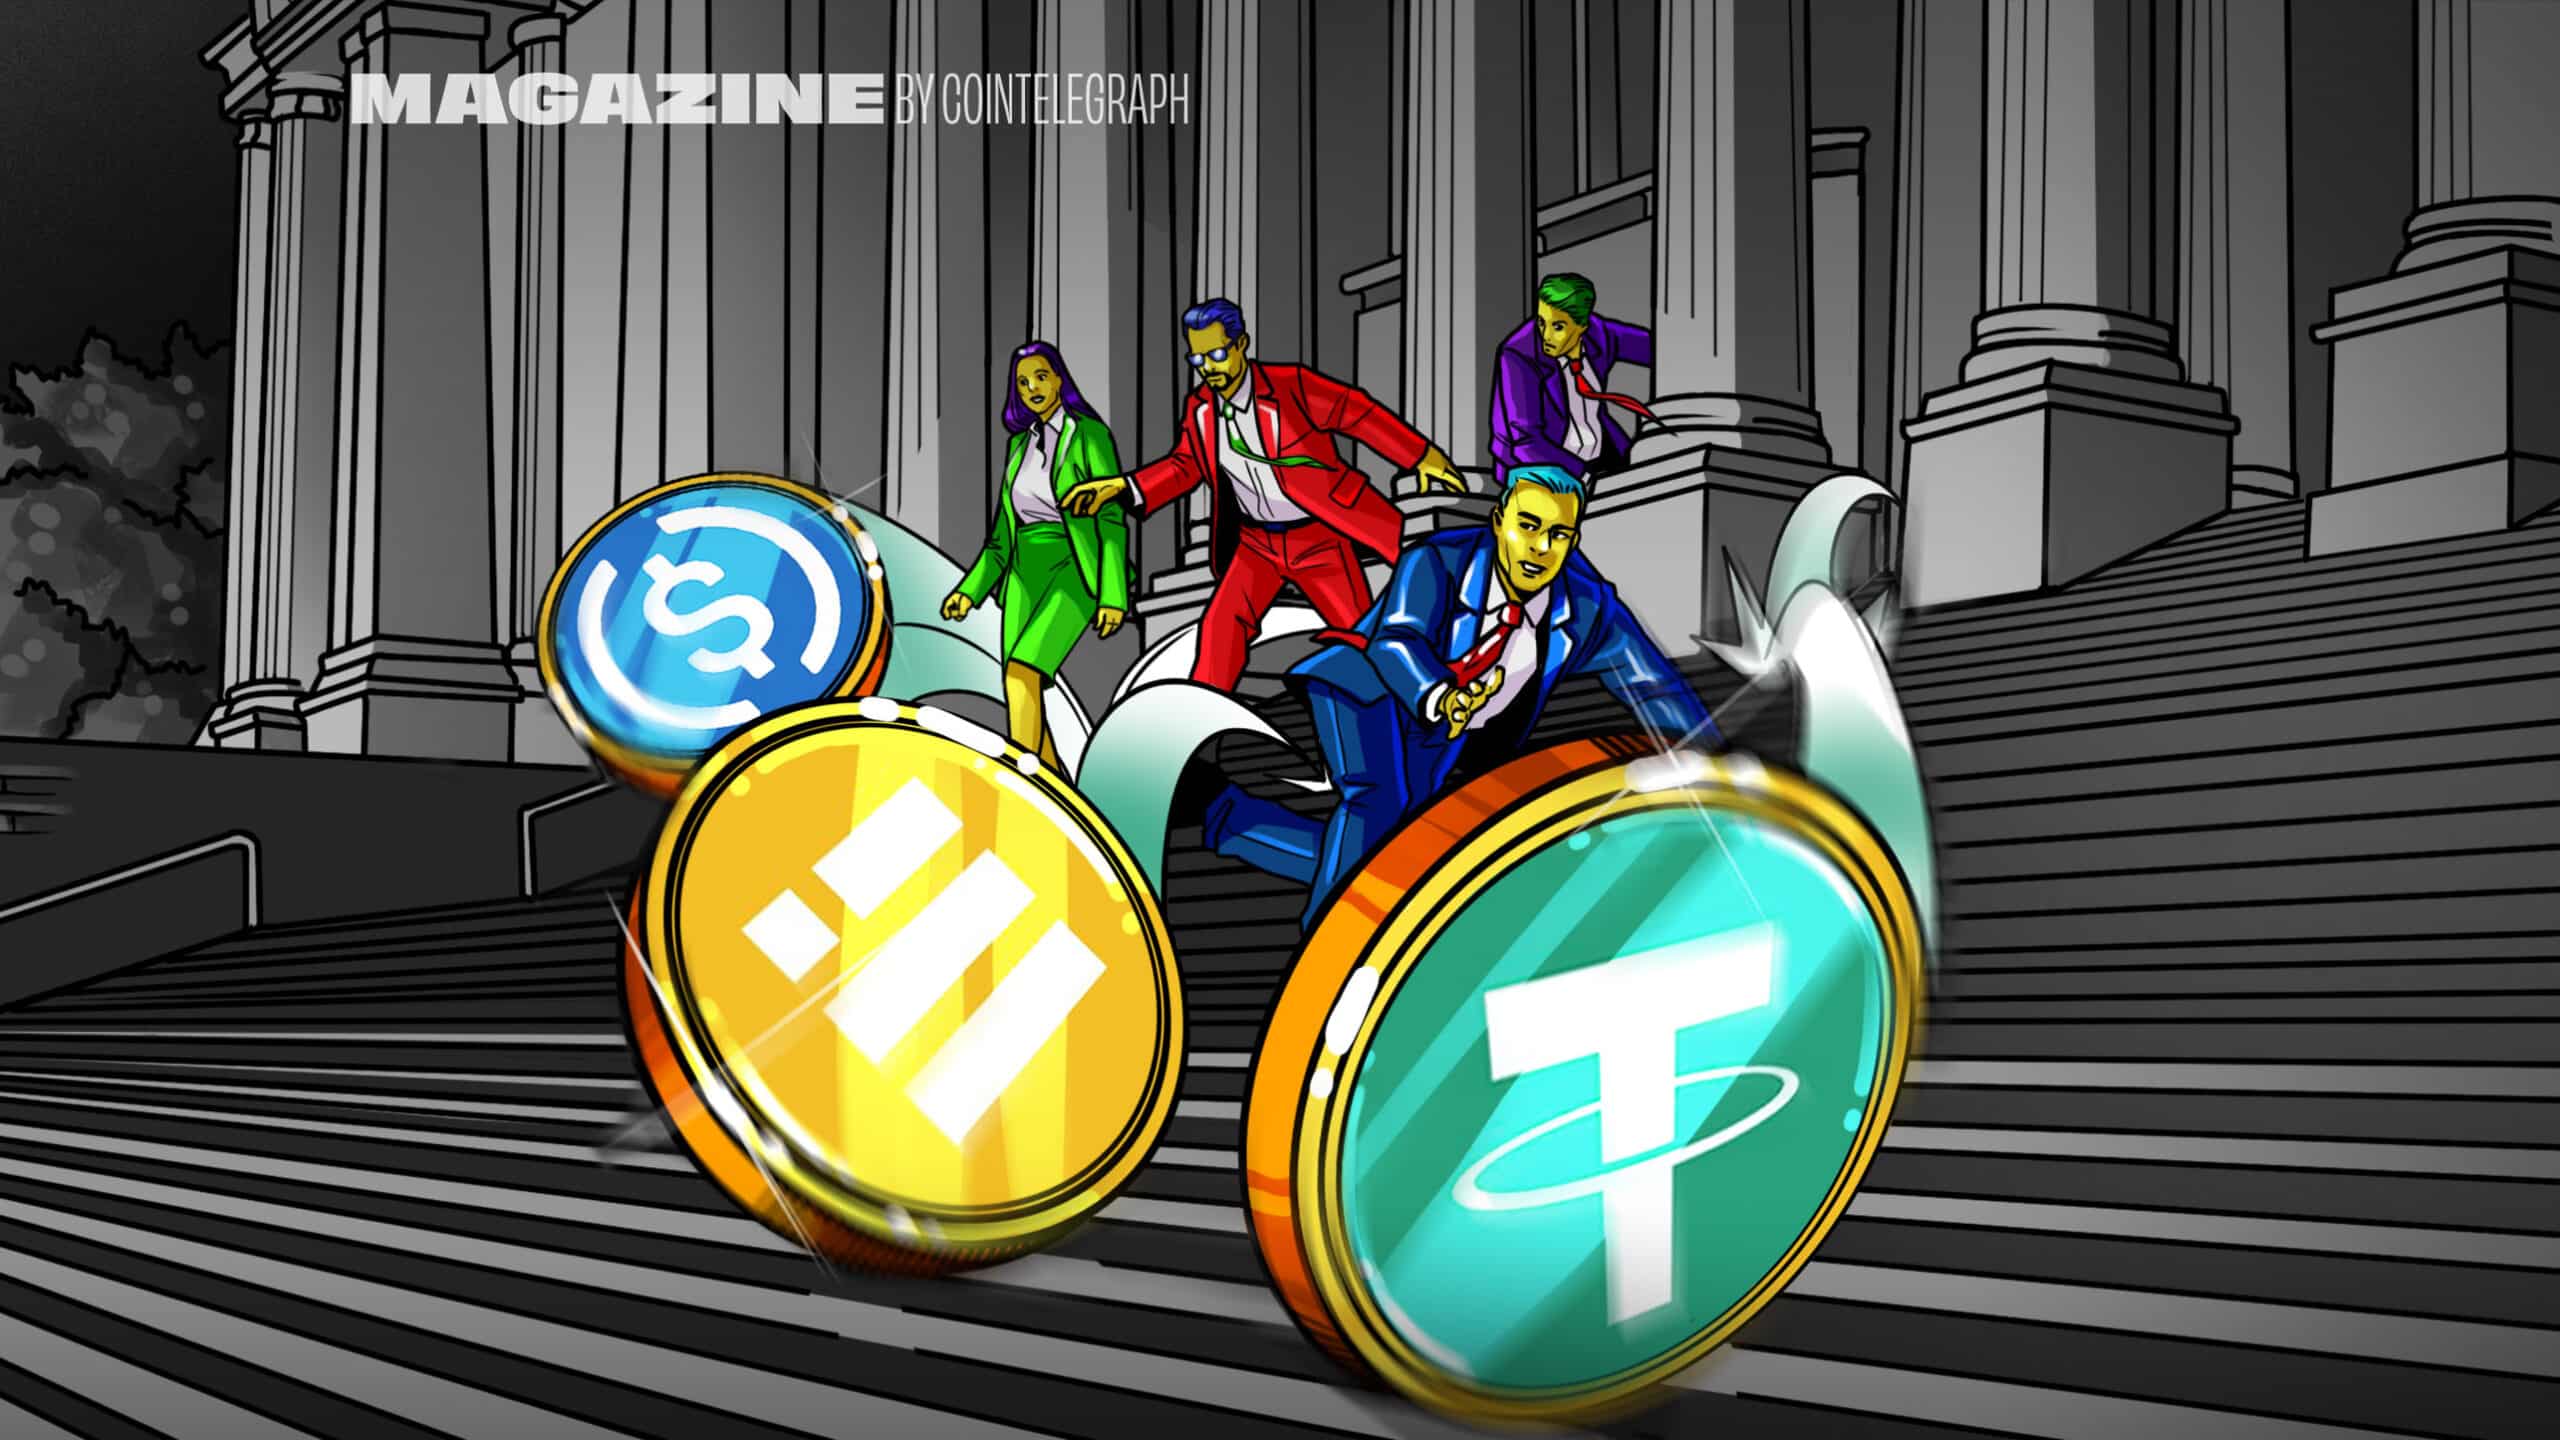 Depegging, bank runs and other risks loom – Cointelegraph Magazine